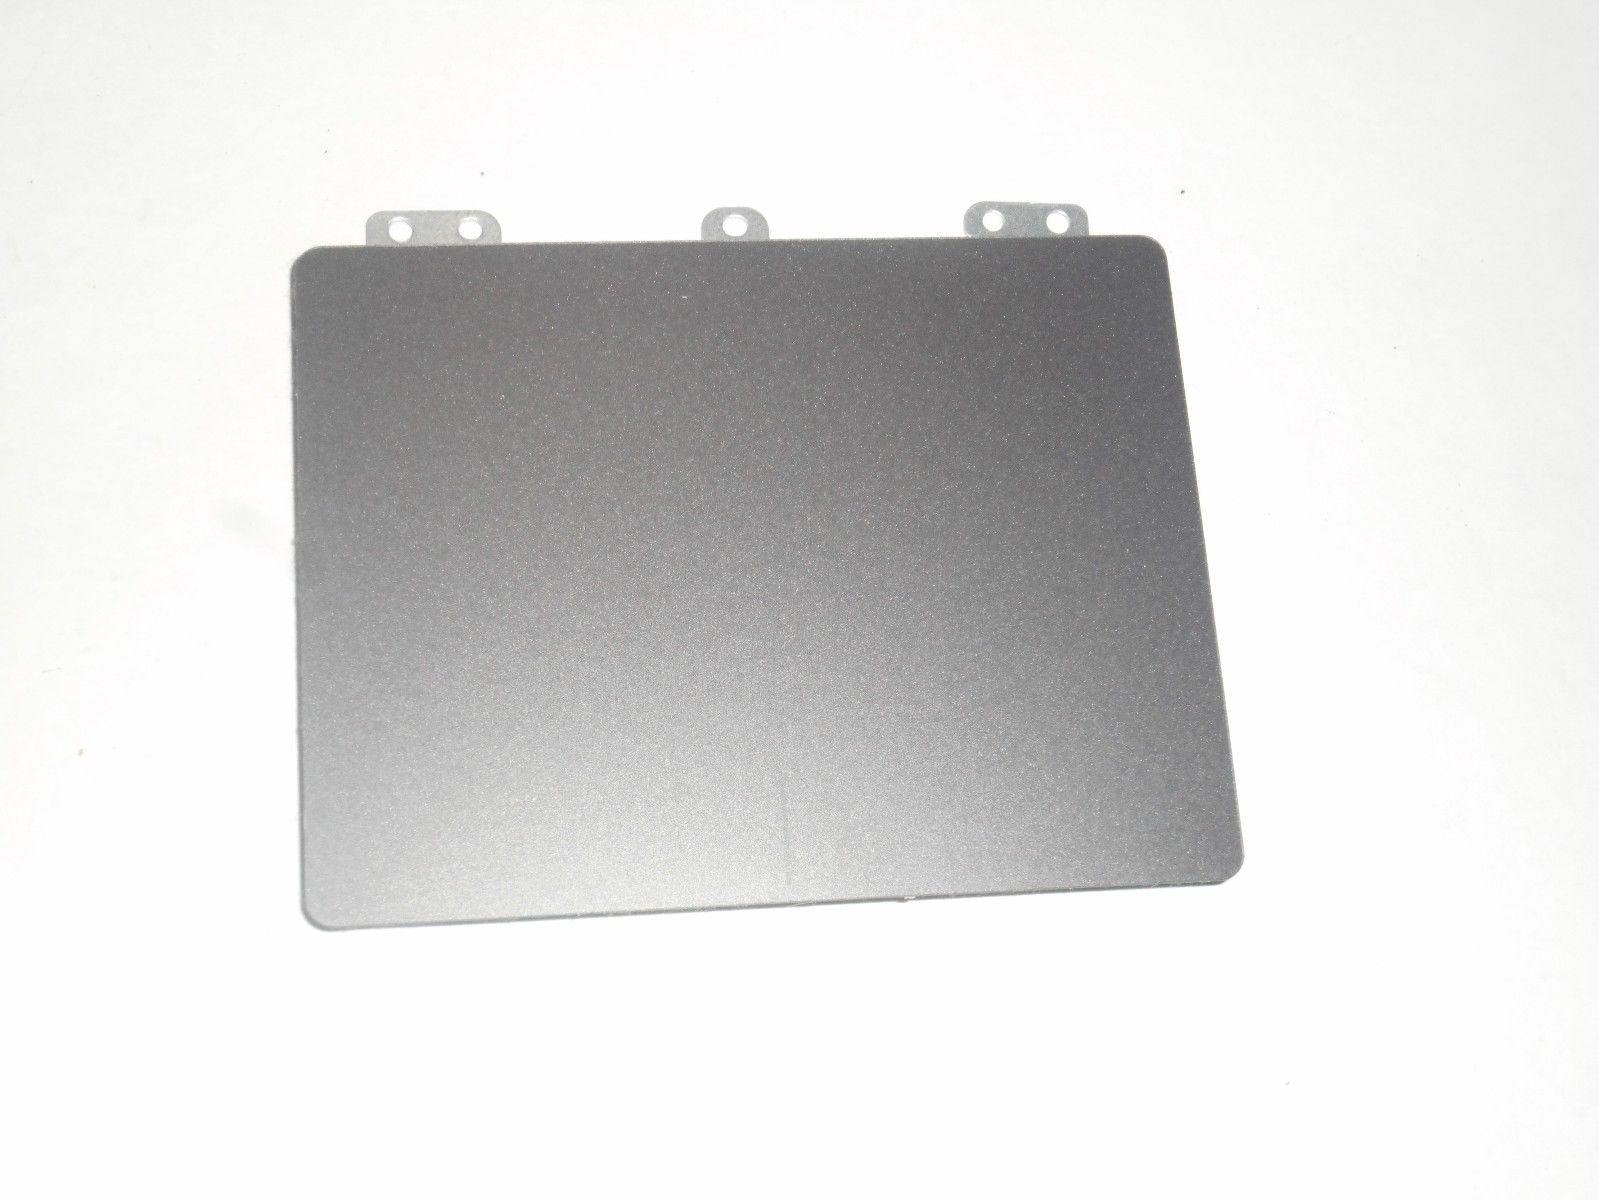 Dell DF4M0 Touchpad Gray Inspiron 15 5555 5558 5559 17 5755 5758 5759 0DF4M0 TM-P3014-003